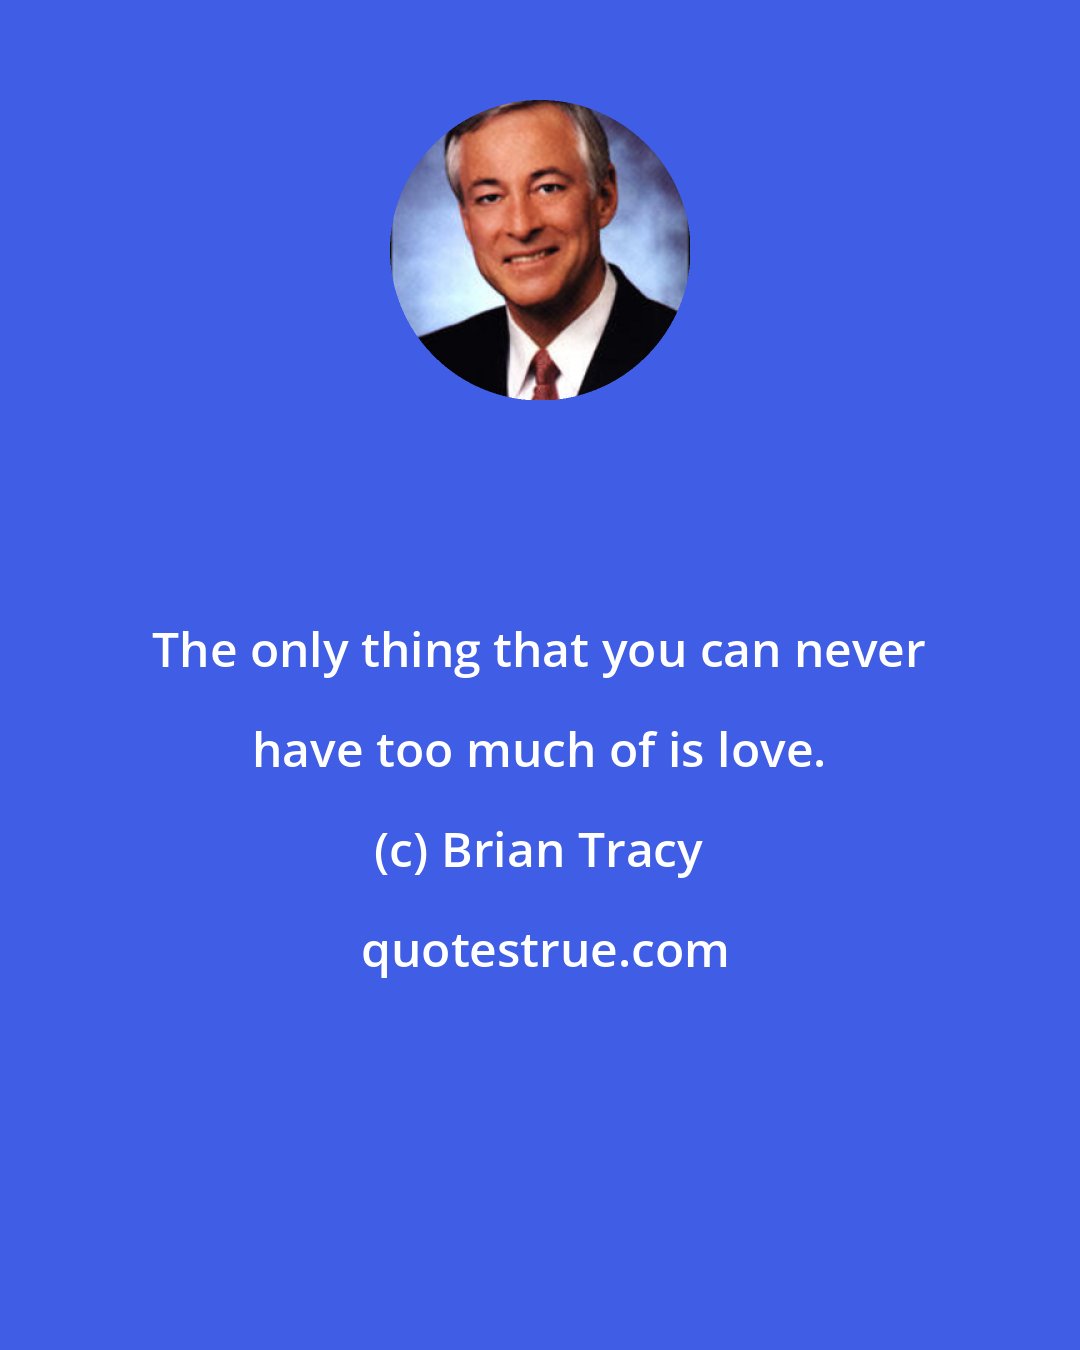 Brian Tracy: The only thing that you can never have too much of is love.